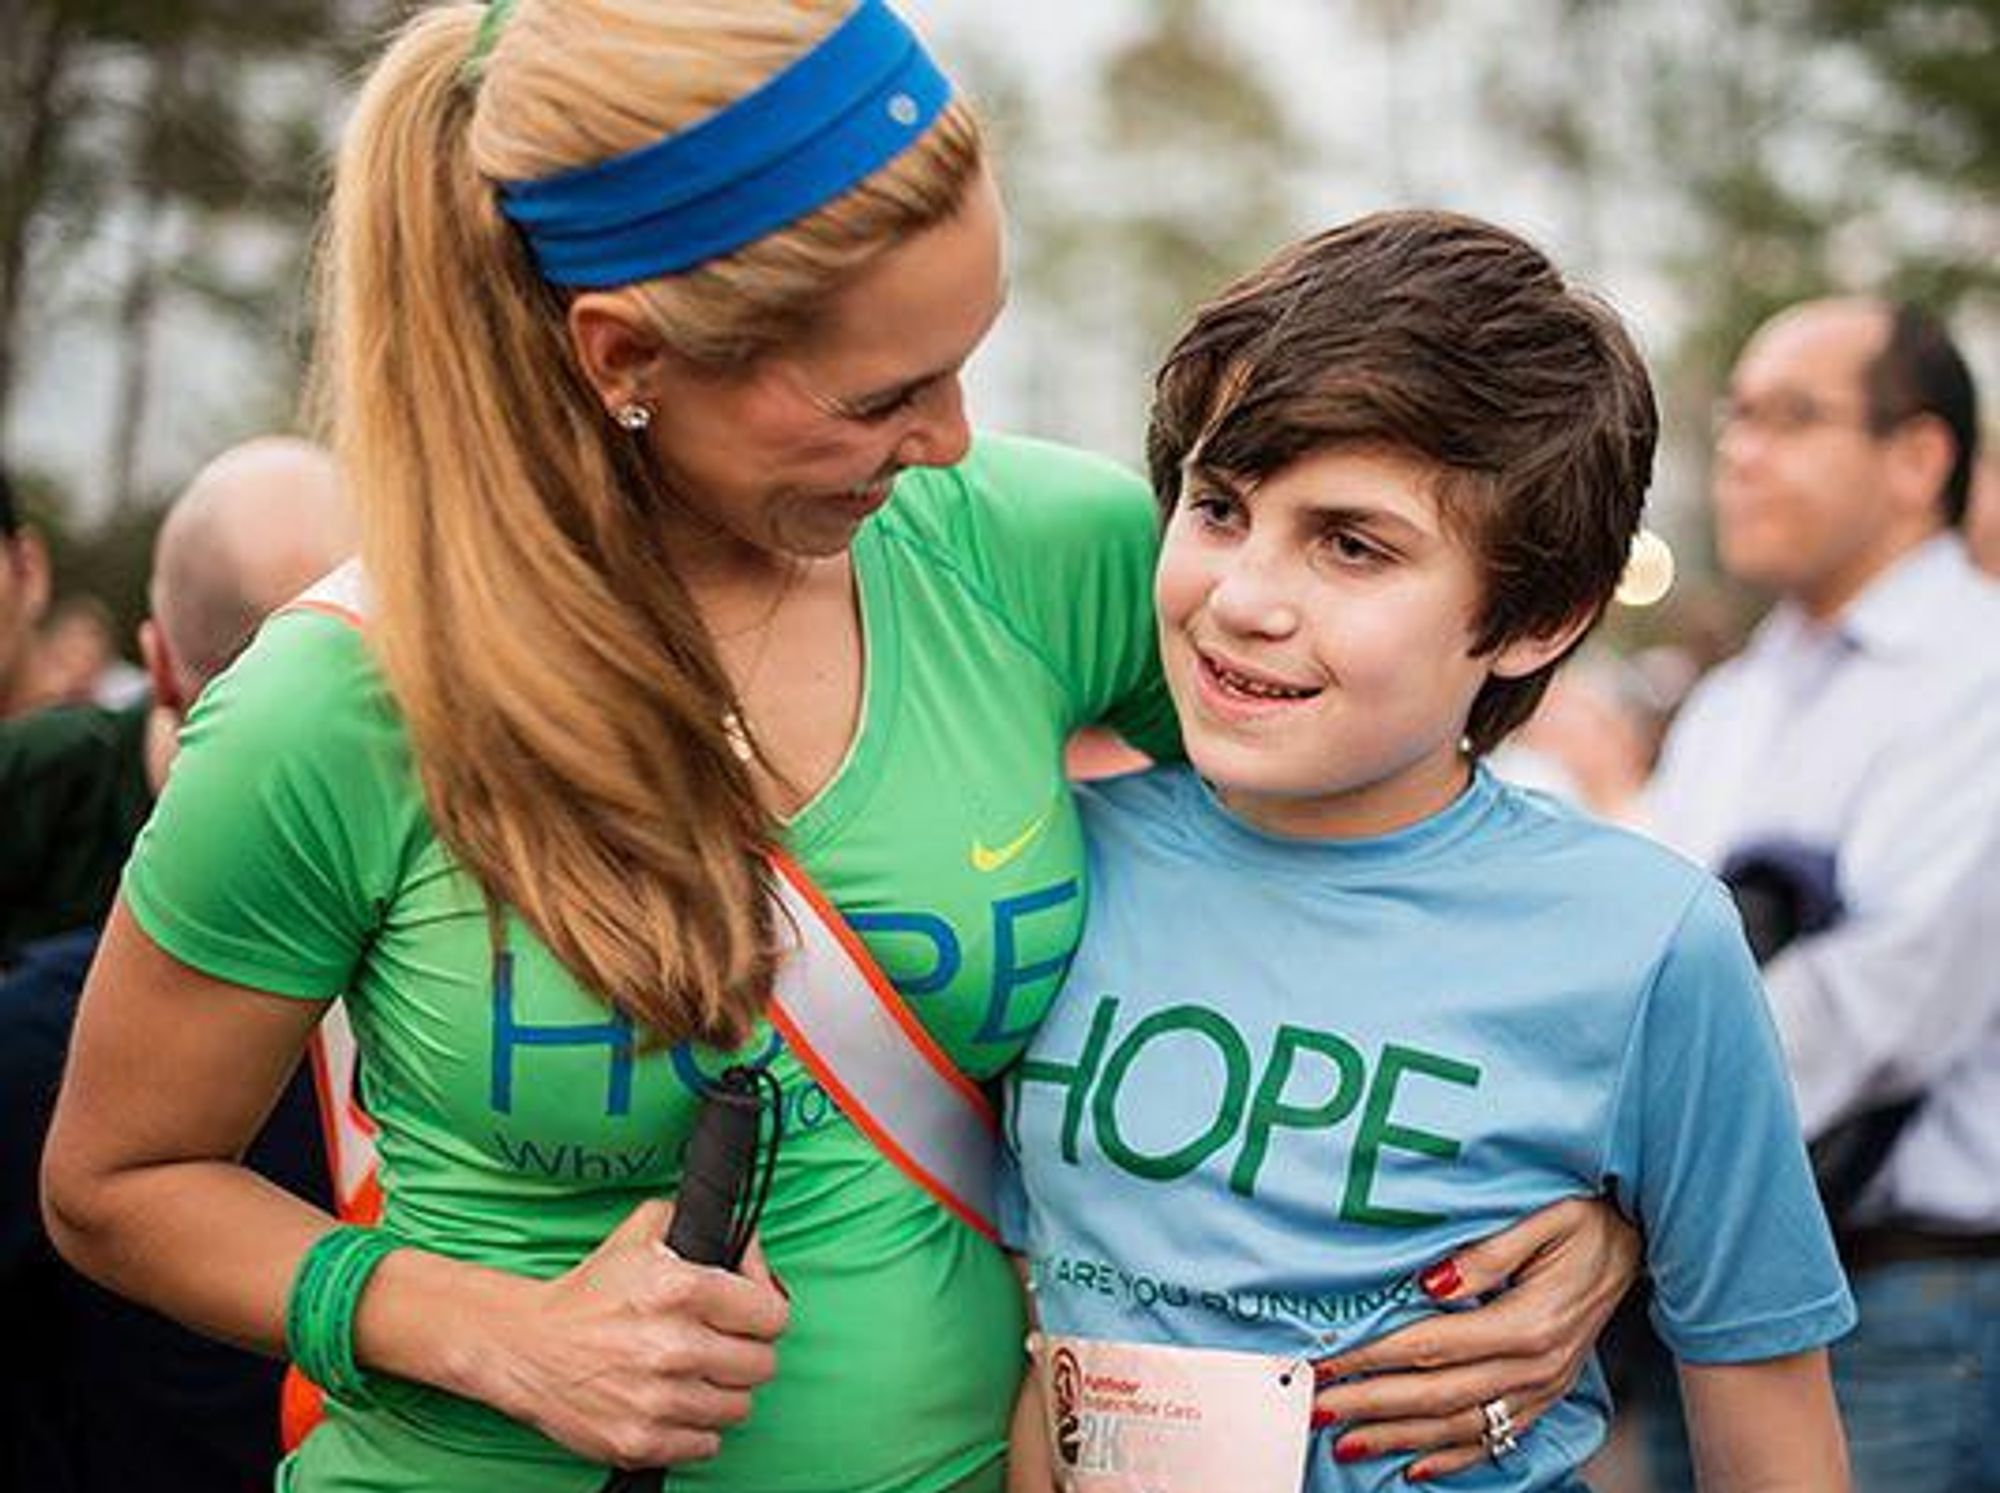 Will Herndon Research Fund Run for HOPE